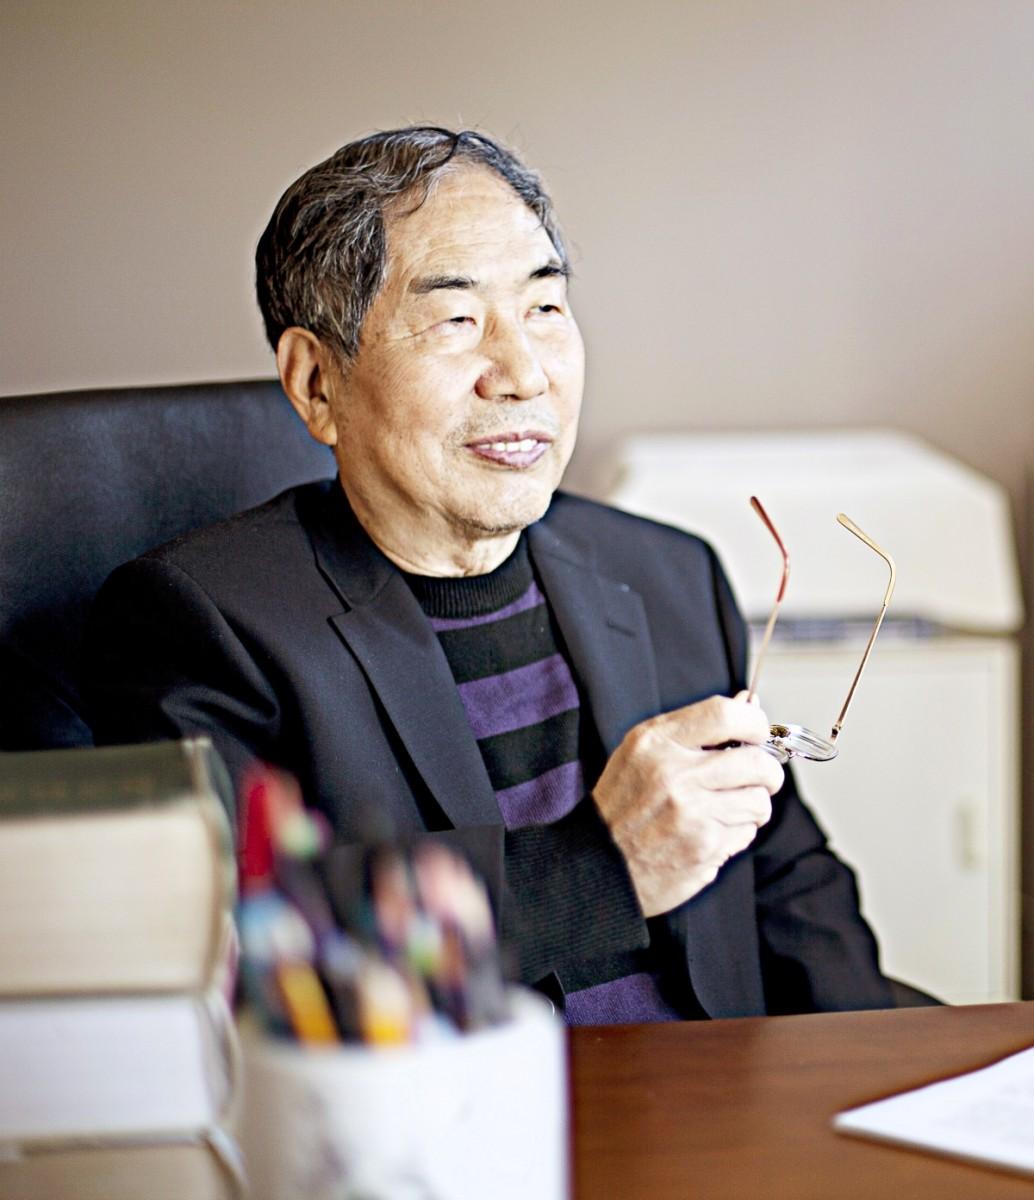 <a><img class="wp-image-1783580" title="LiBaoqing" src="https://www.theepochtimes.com/assets/uploads/2015/09/LiBaoqing.jpg" alt="Li Baoqing, a prominent Chinese scientist" width="305" height="354"/></a>